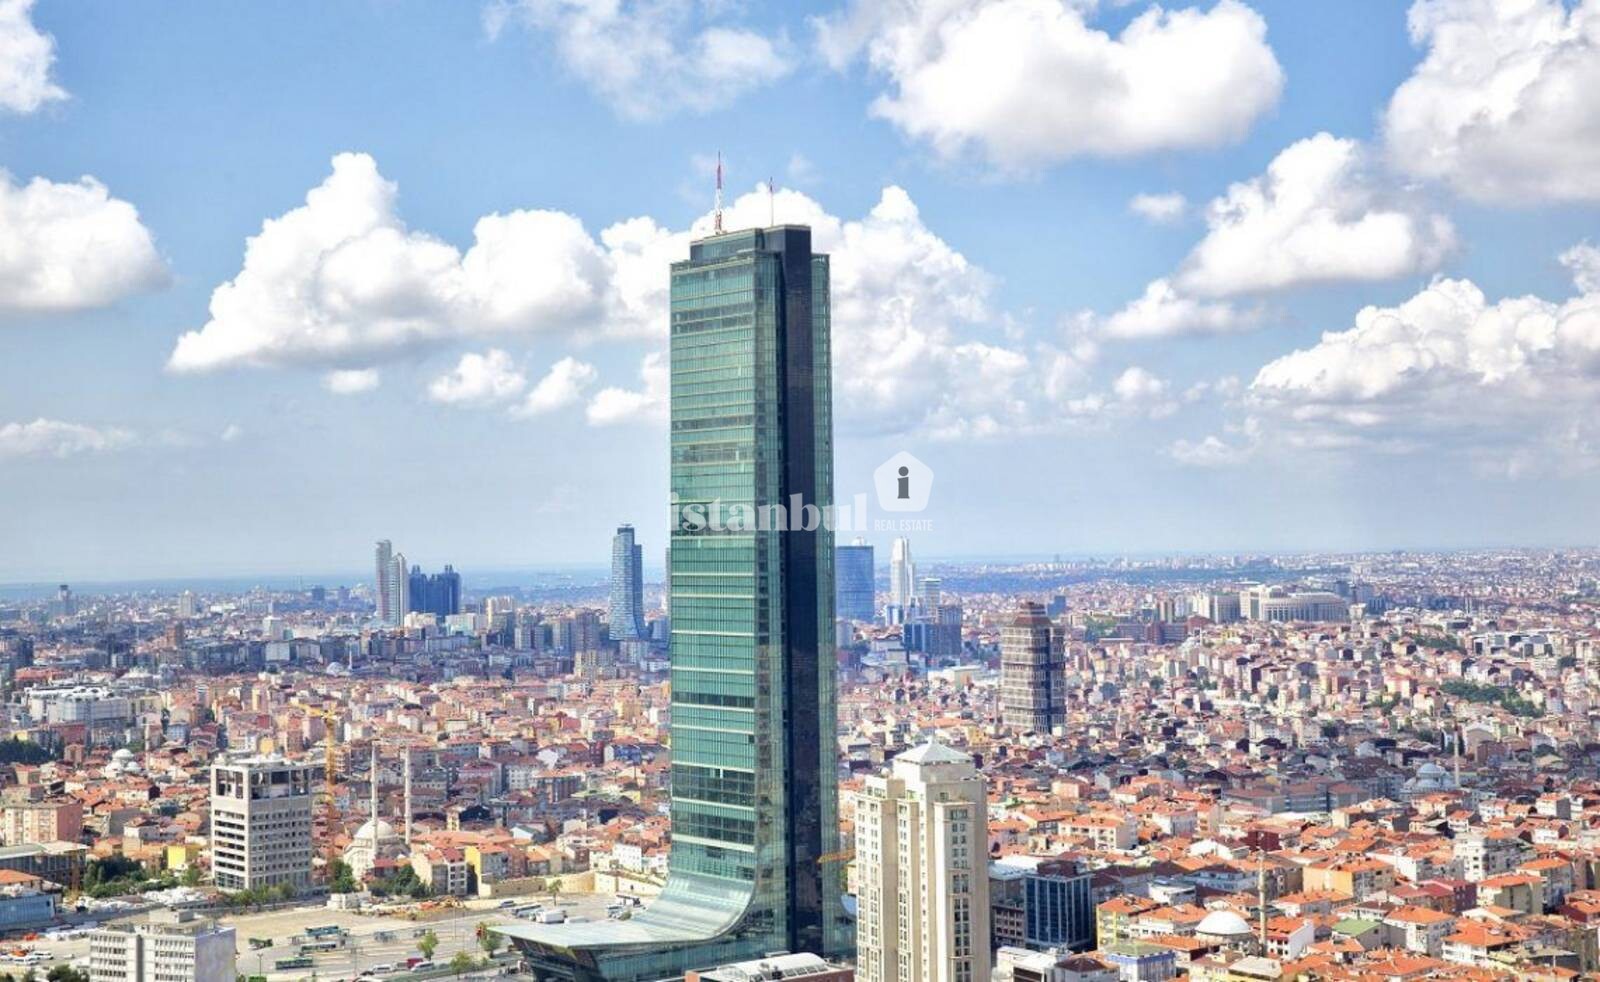 sapphire residence luxury real estate for sale in istanbul turkey property for sale in turkey citizenship